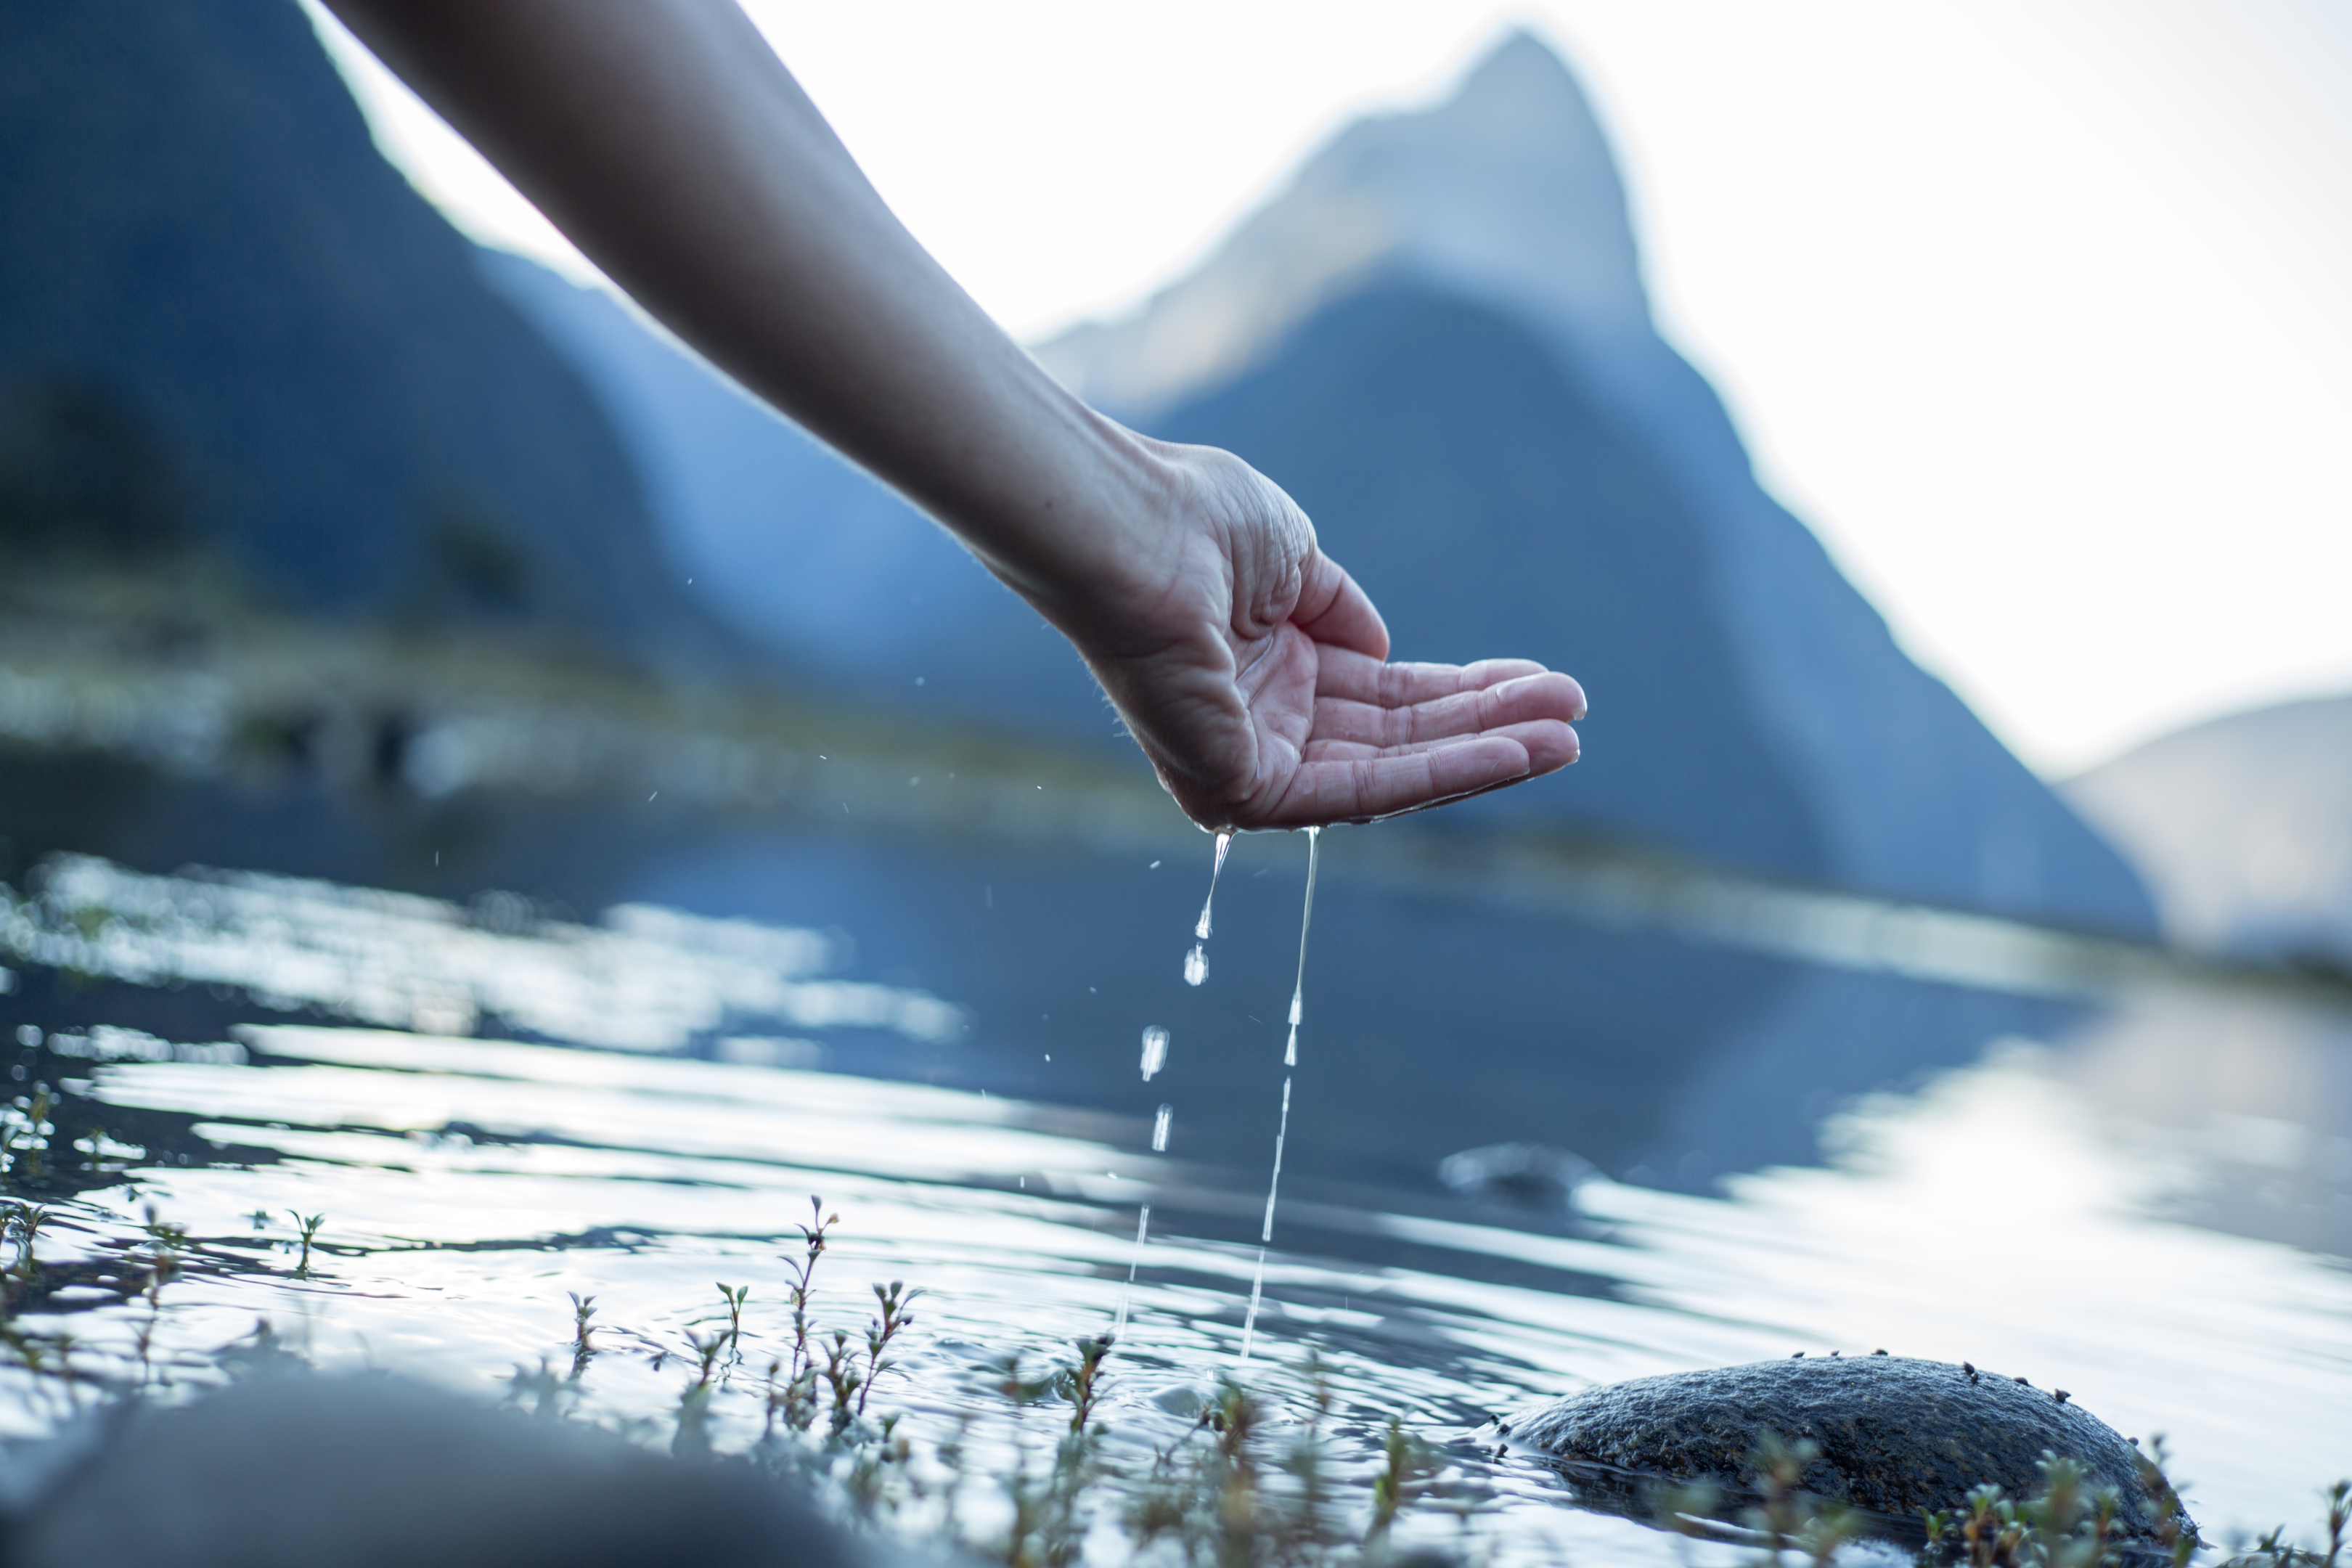 A hand cupped to catch the fresh water from the lake